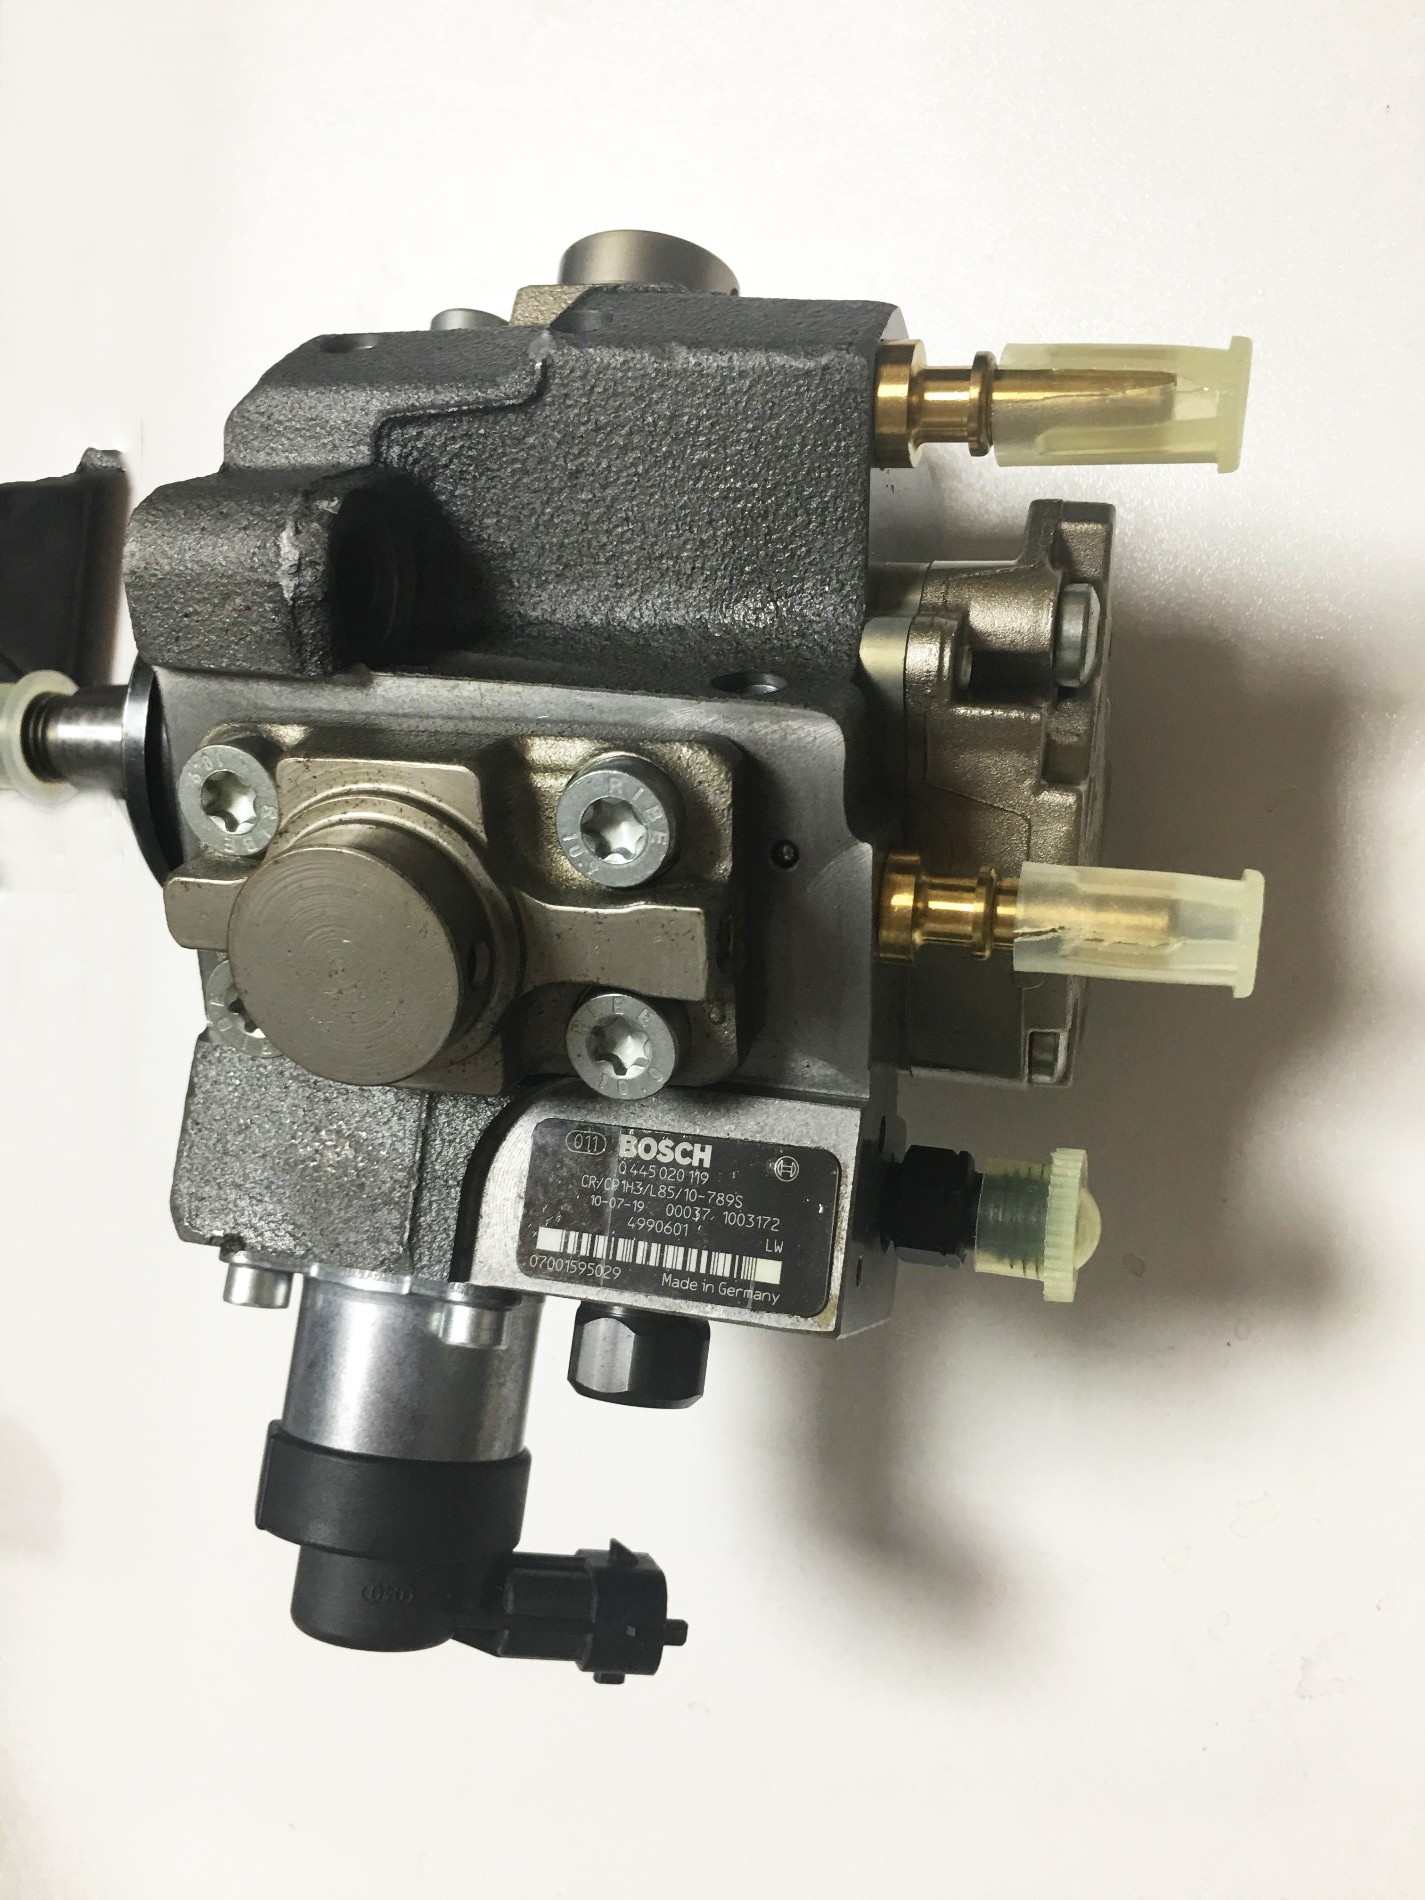 Supply ISBe ISDe QSB Diesel Fuel Injection Pump 0445020119, ISBe ISDe QSB Diesel Fuel Injection Pump 0445020119 Factory Quotes, ISBe ISDe QSB Diesel Fuel Injection Pump 0445020119 Producers OEM